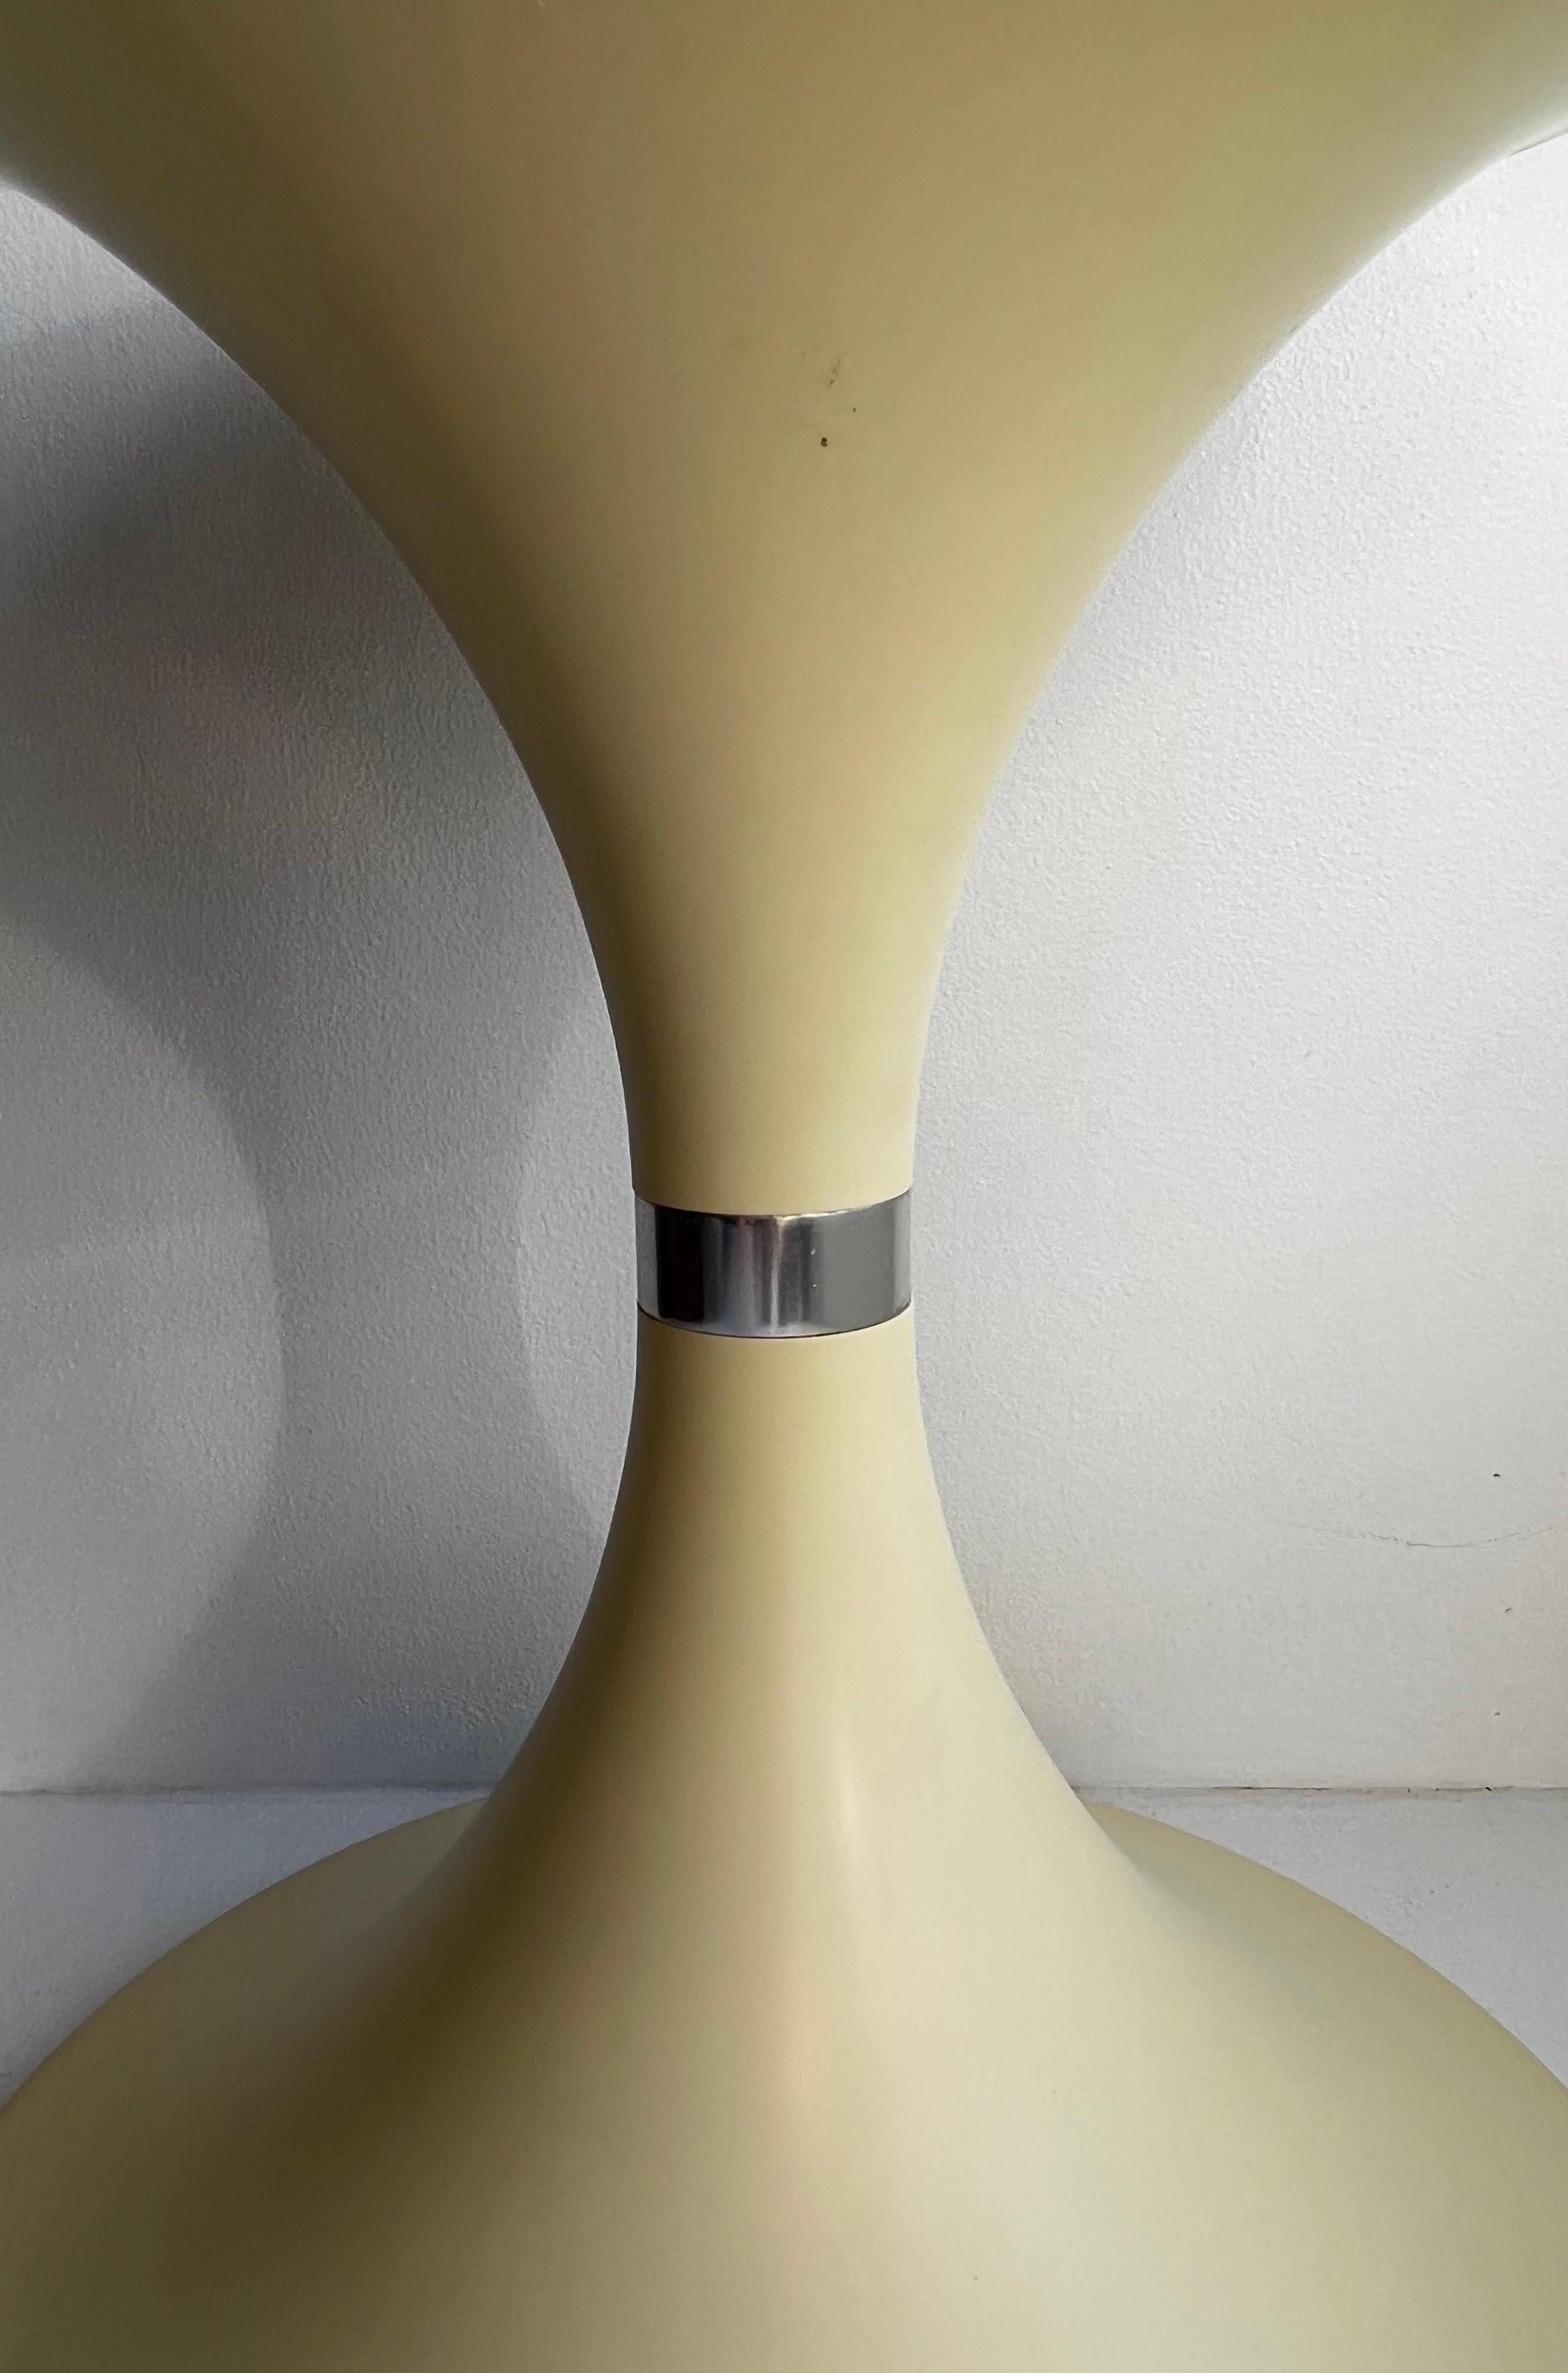 Space Age End Table / Stool in the Style of I. Gardella & A. Castelli, c. 1960s For Sale 1